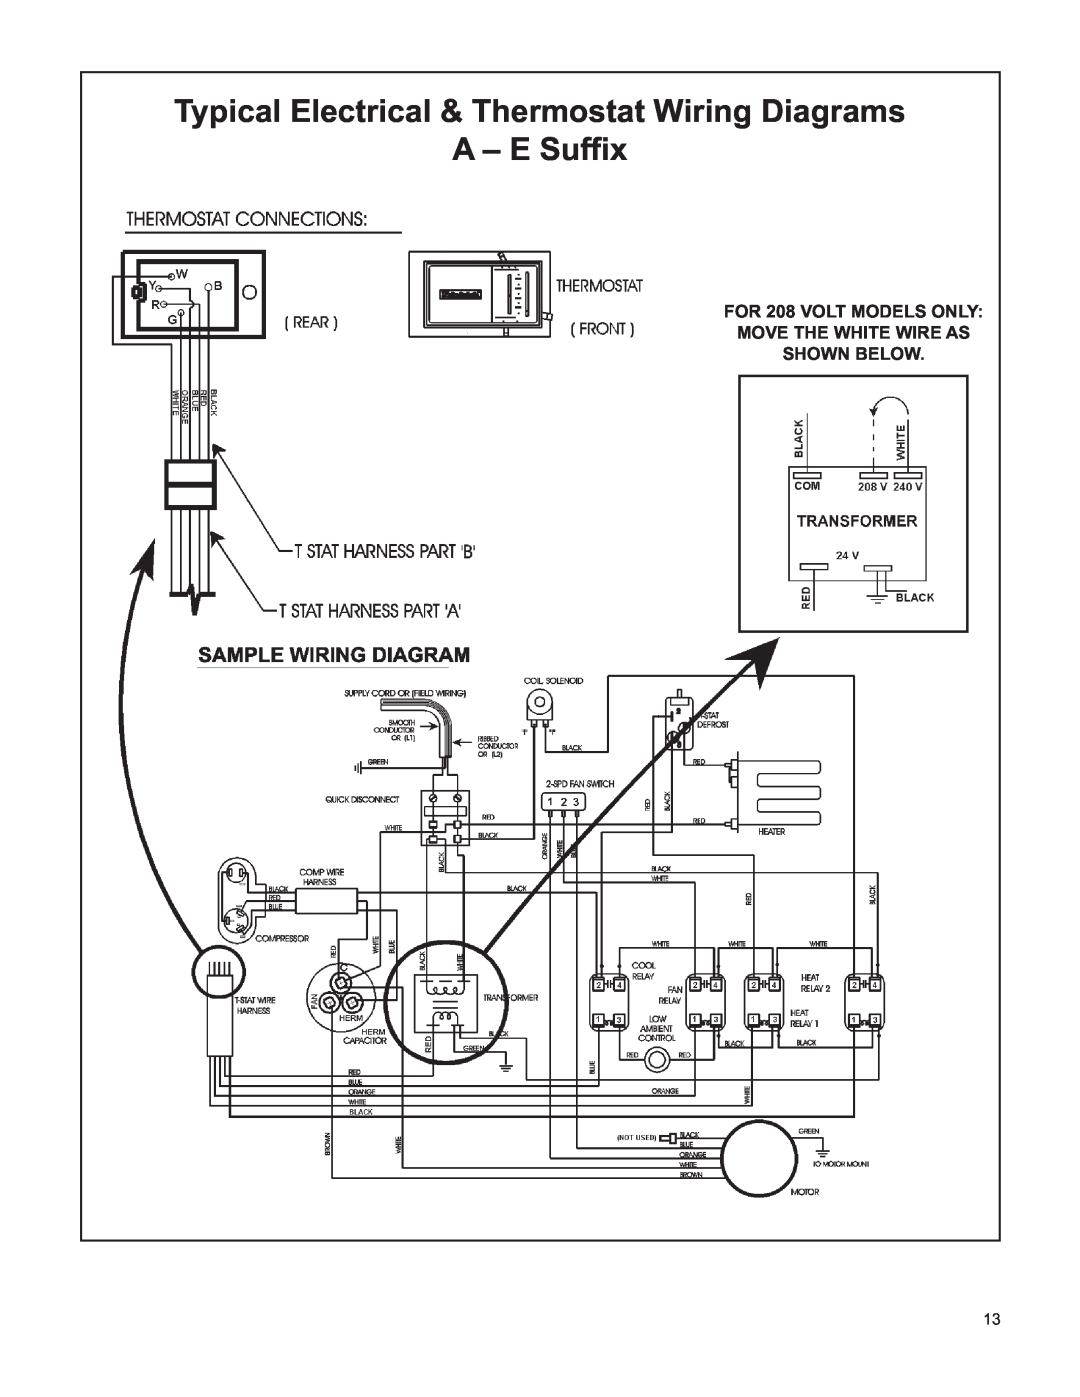 Friedrich V(E, H)A09K25 service manual A - E Sufﬁx, Typical Electrical & Thermostat Wiring Diagrams, Shown Below 